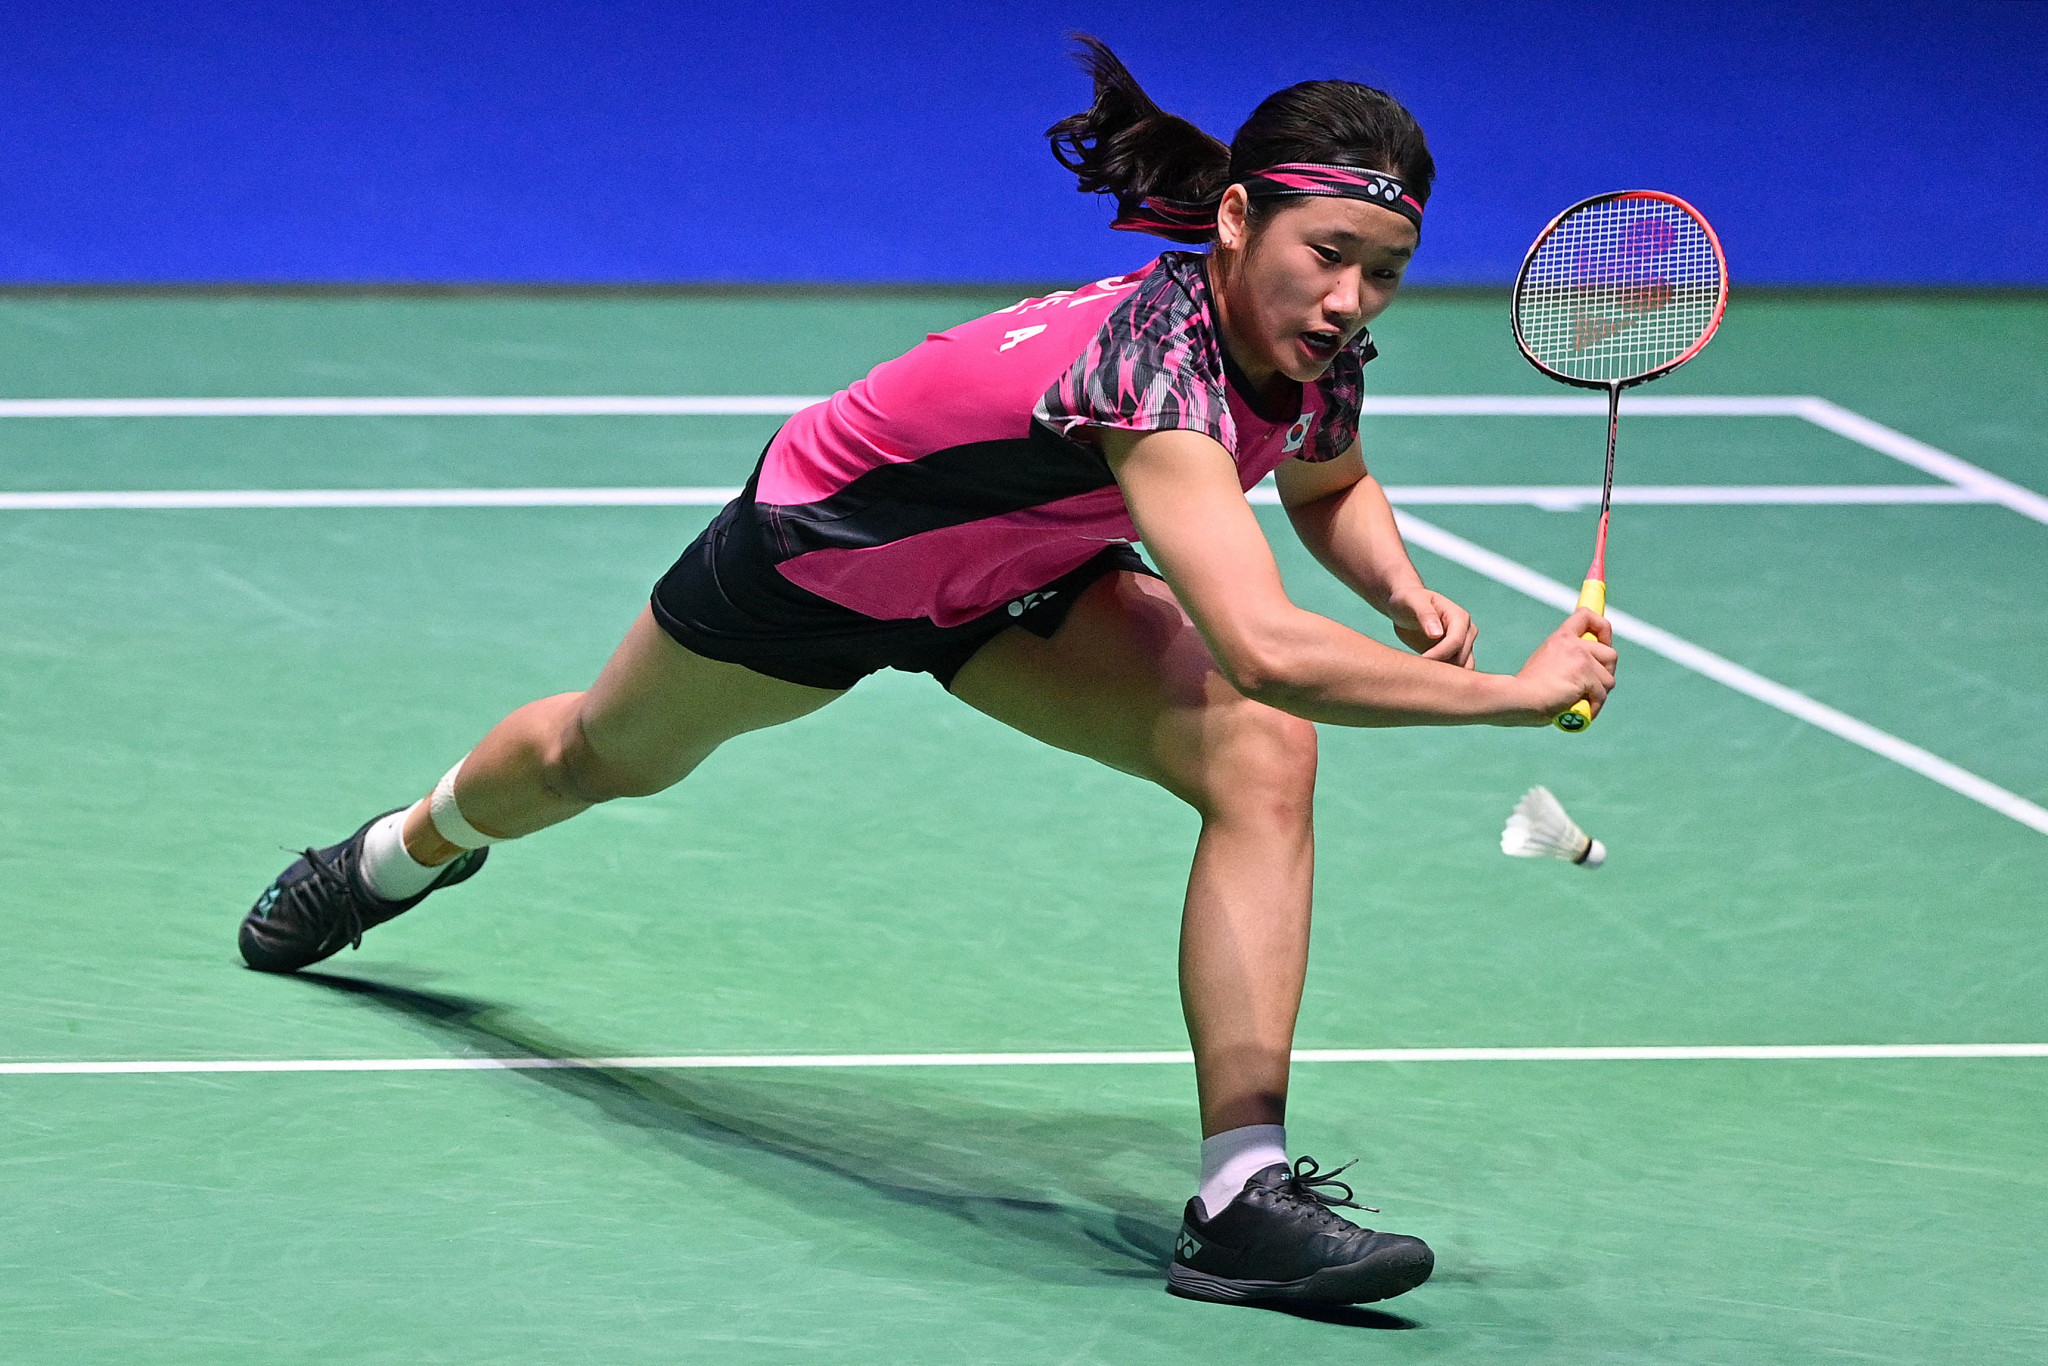 South Korea's An Se-young beat Olympic bronze medallist PV Sindhu in straight games in an impressive 5-0 victory for her country against India ©Getty Images